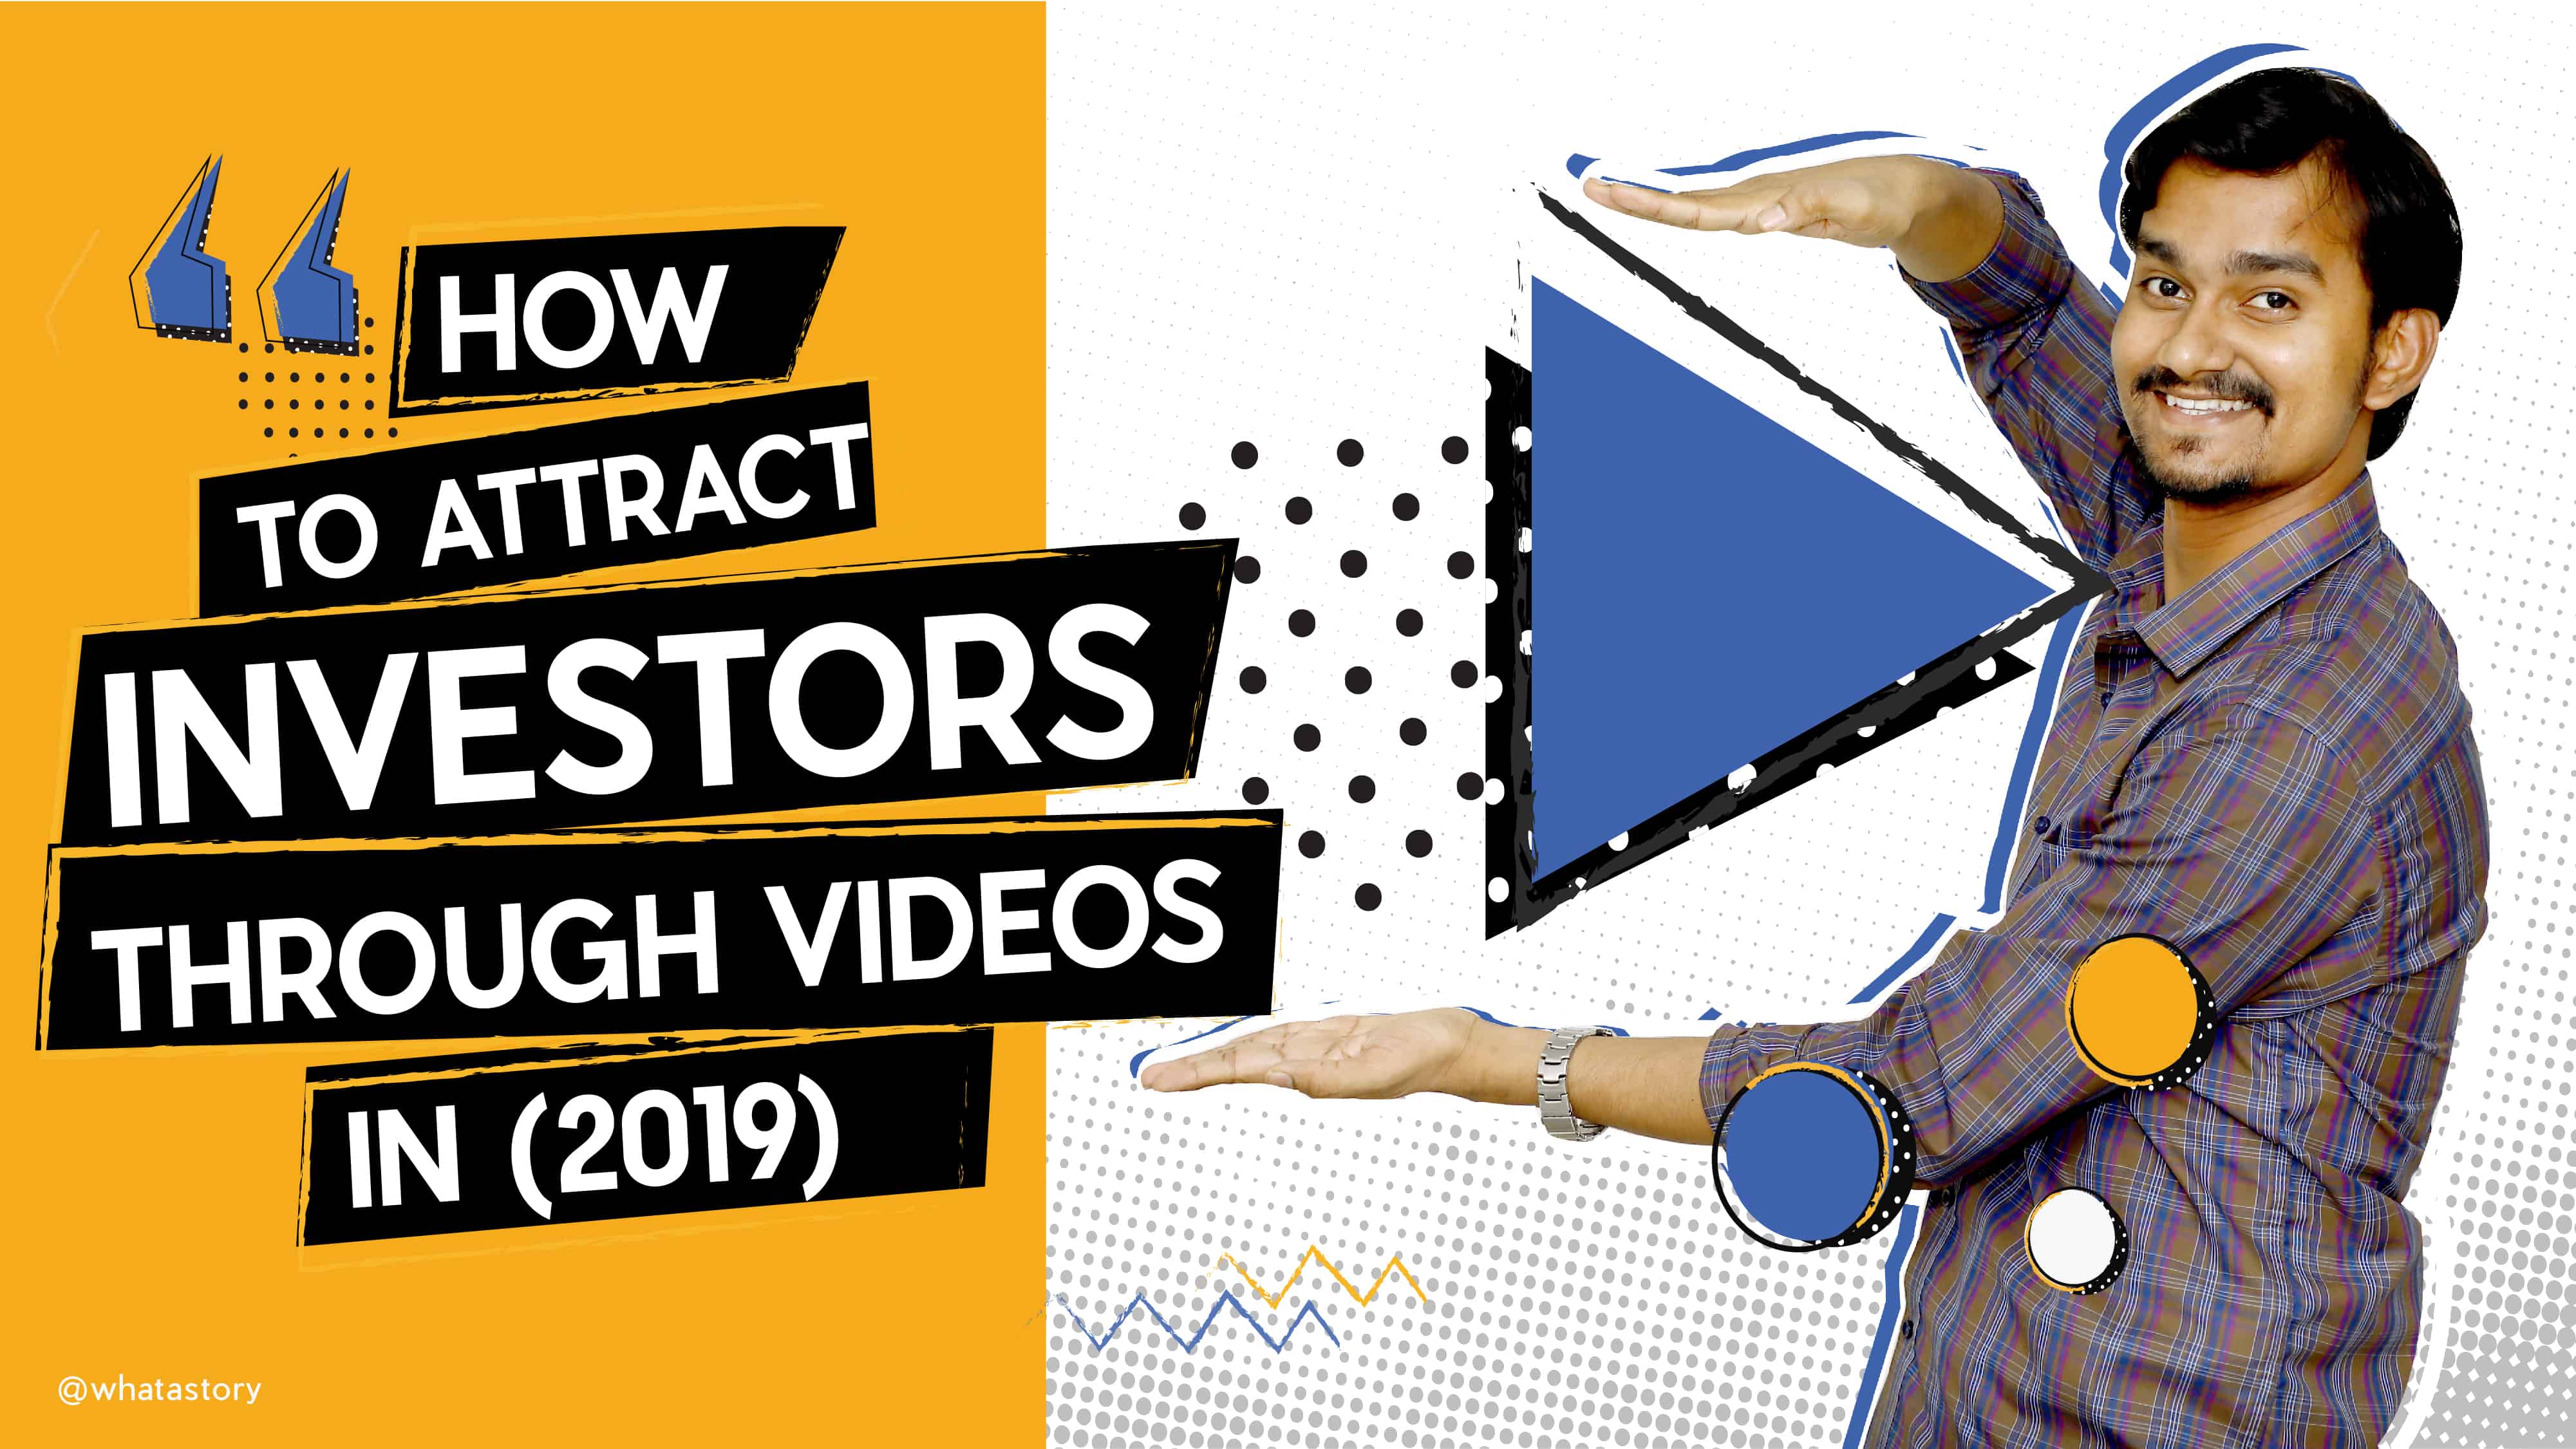 How to attract investors through videos in 2019